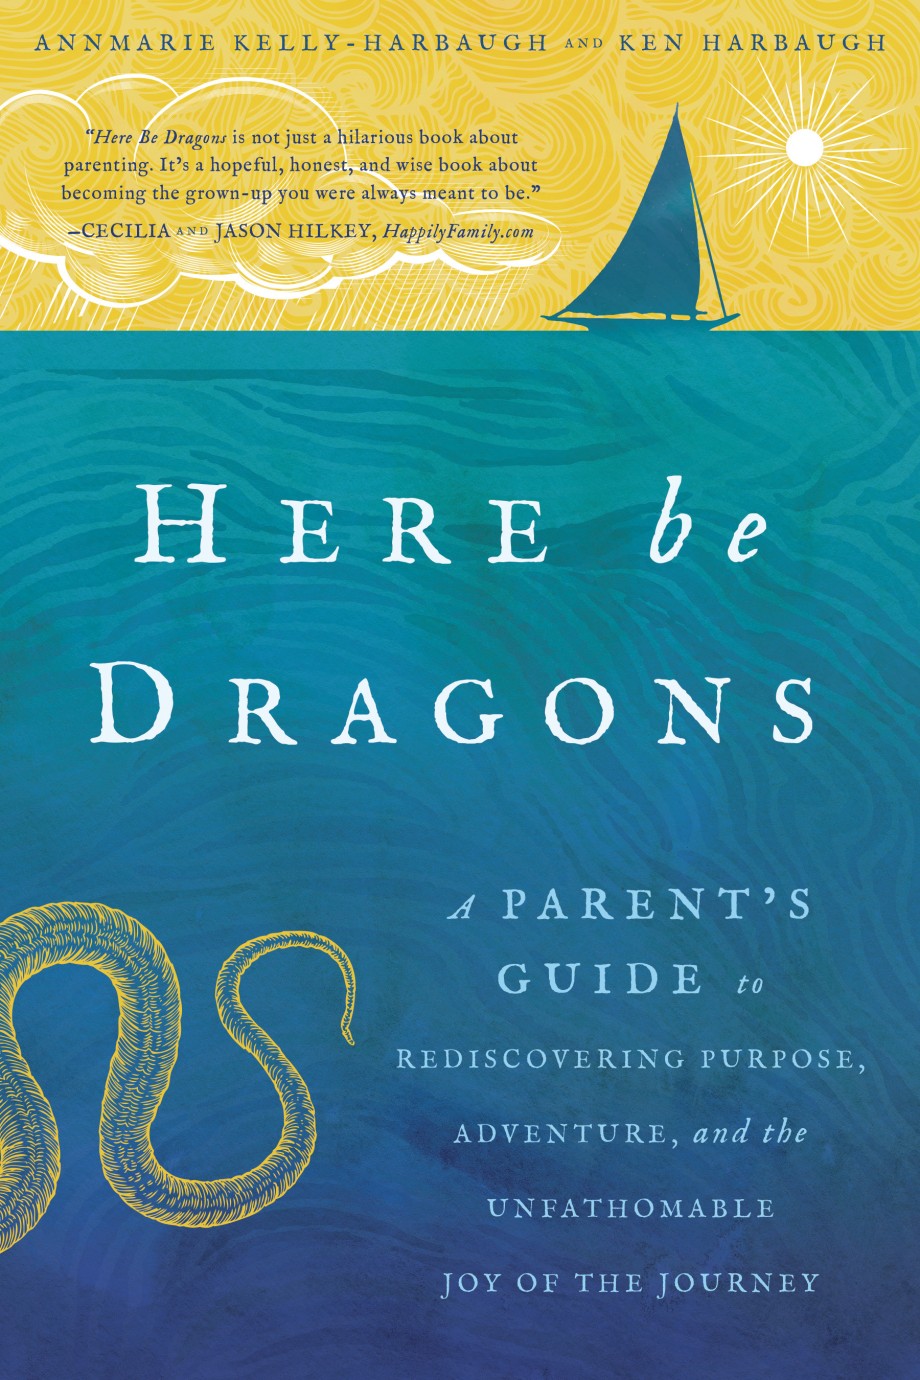 Here Be Dragons A Parent's Guide to Rediscovering Purpose, Adventure, and the Unfathomable Joy of the Journey